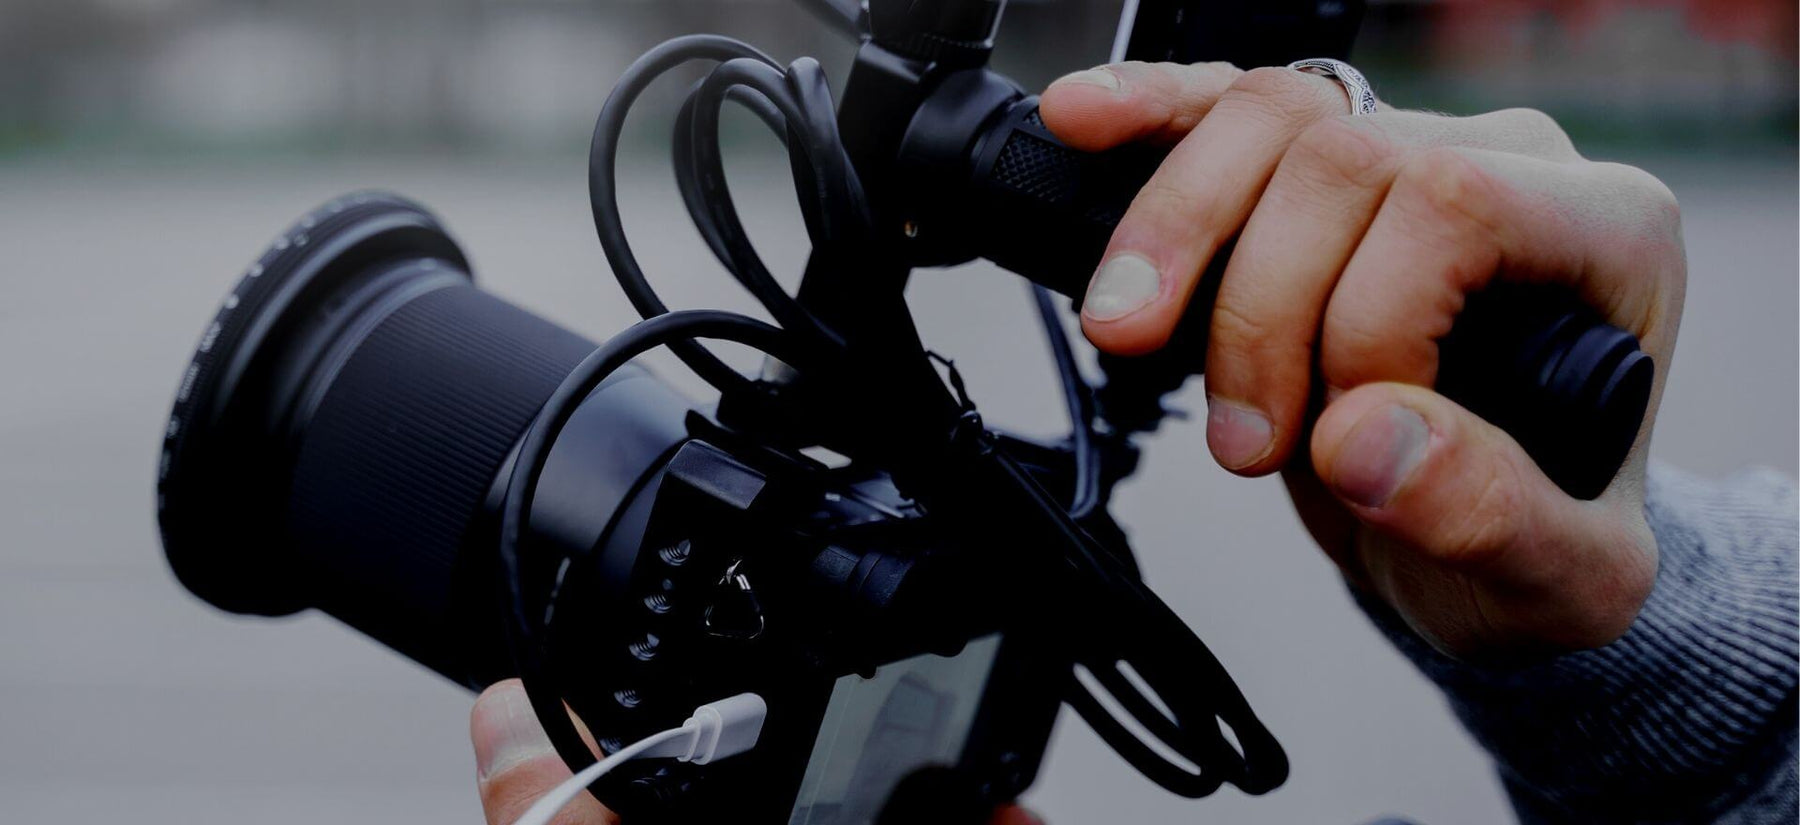 Best Camera Hand Grips Hero - Image of a Filmmaker Using a Hand Grip to Add Stability to His Shots